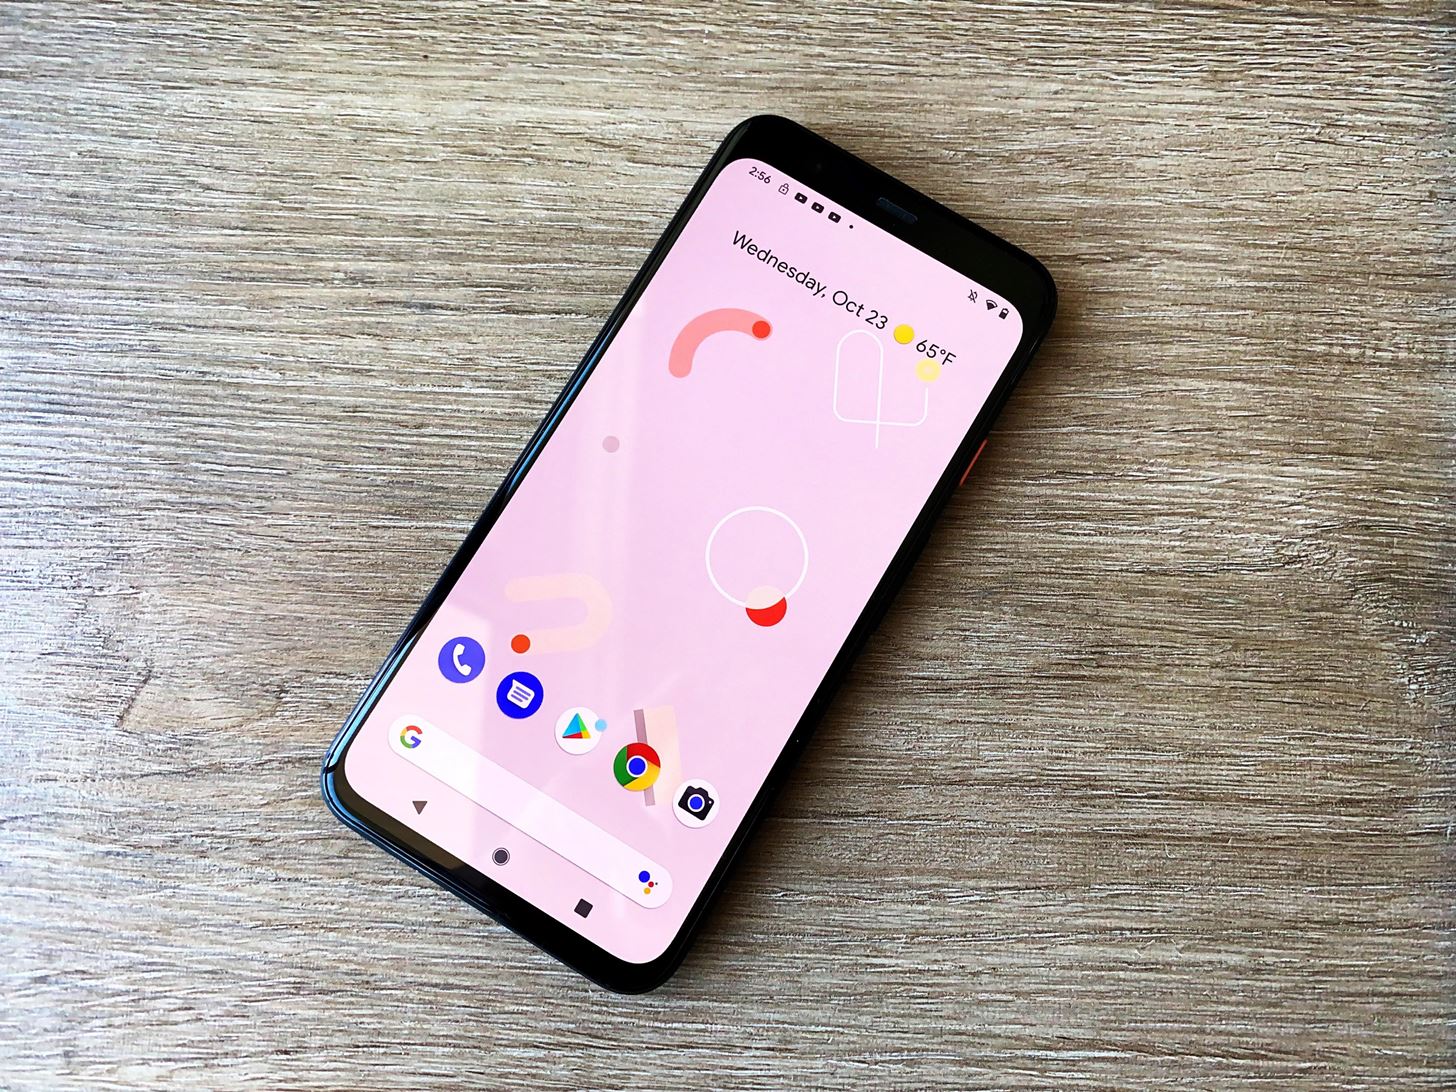 The Best Phones for Rooting & Modding in 2020